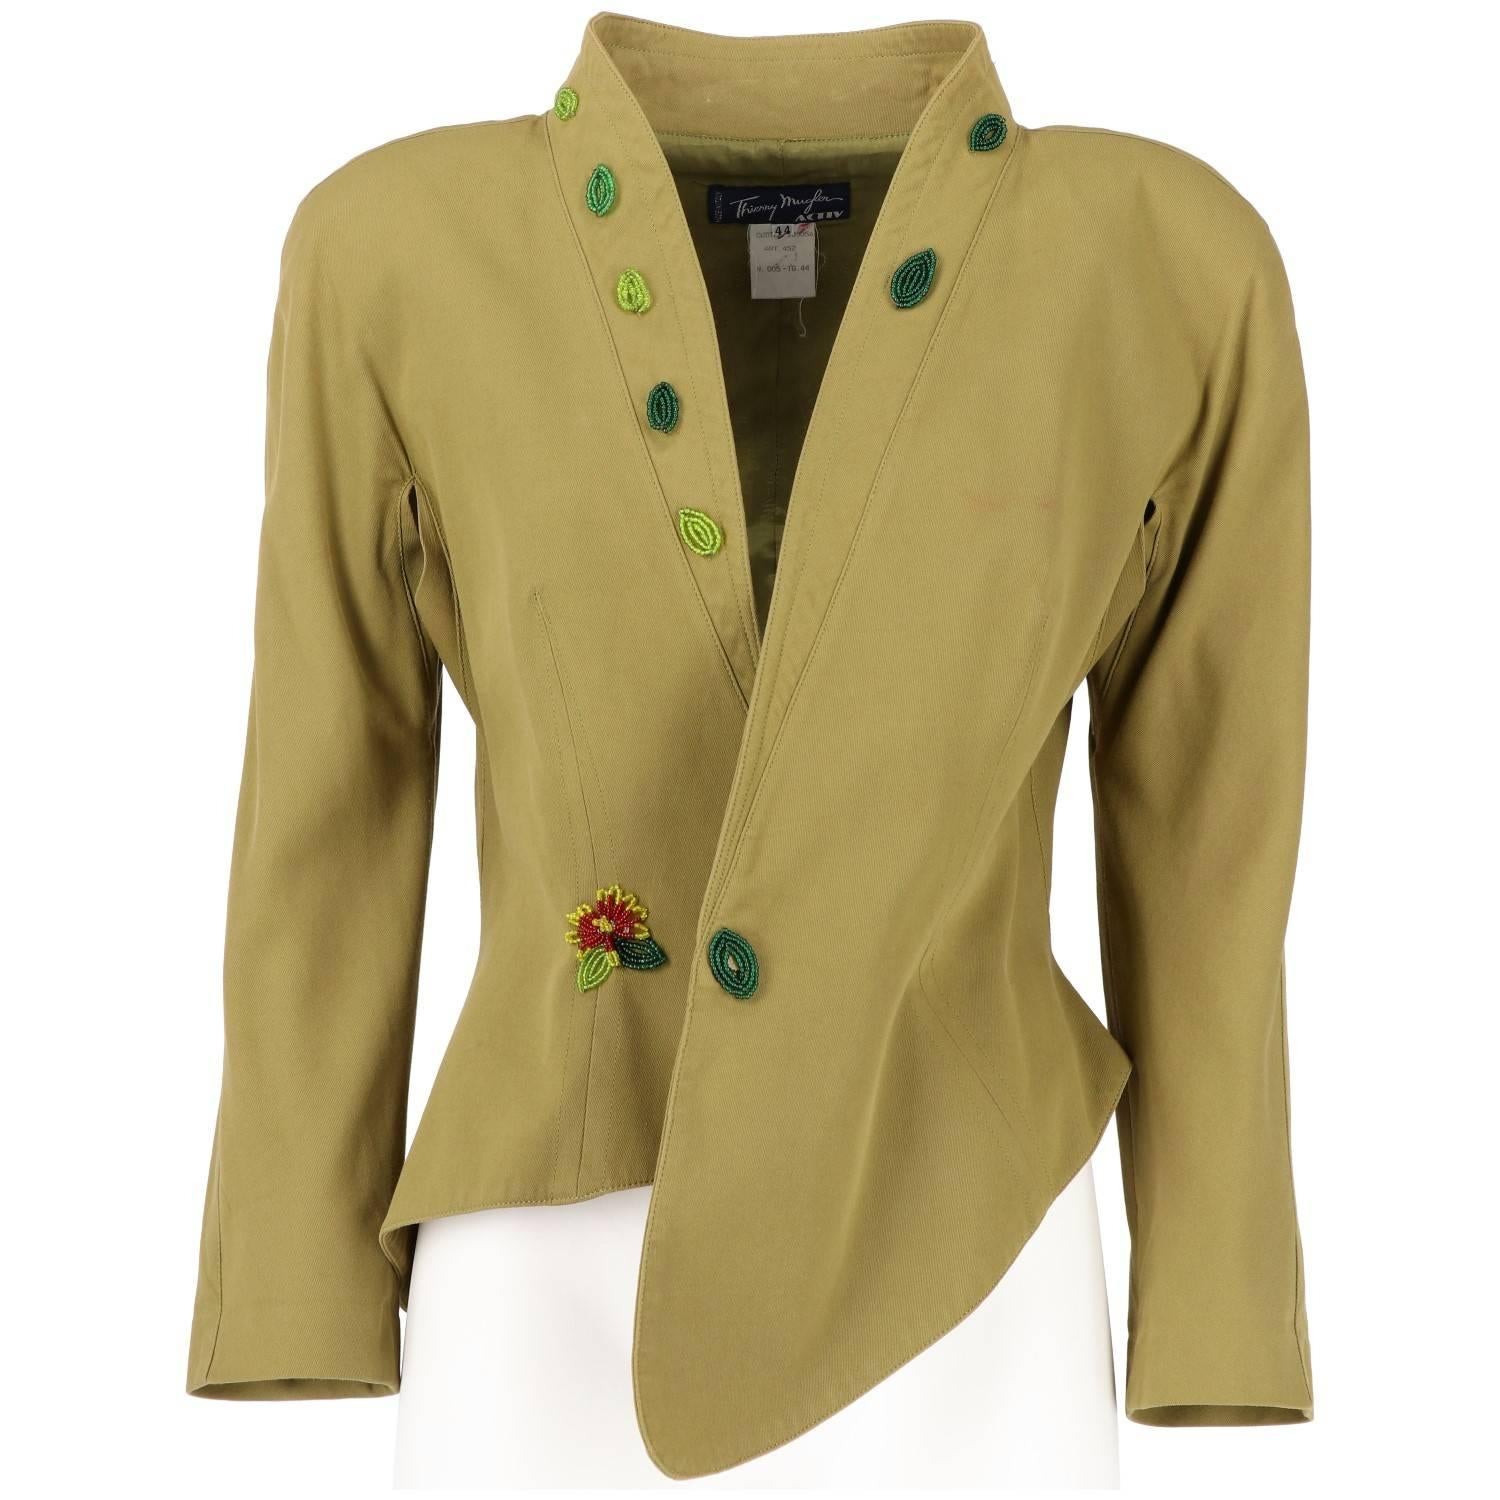 Thierry Mugler olive green cotton blazer jacket with beaded flowers and leaves appliqué. It features a peculiar asymmetrical shape, plunge collar, and button fastening. The main button is covered by beads and remains opened. The item is vintage, it